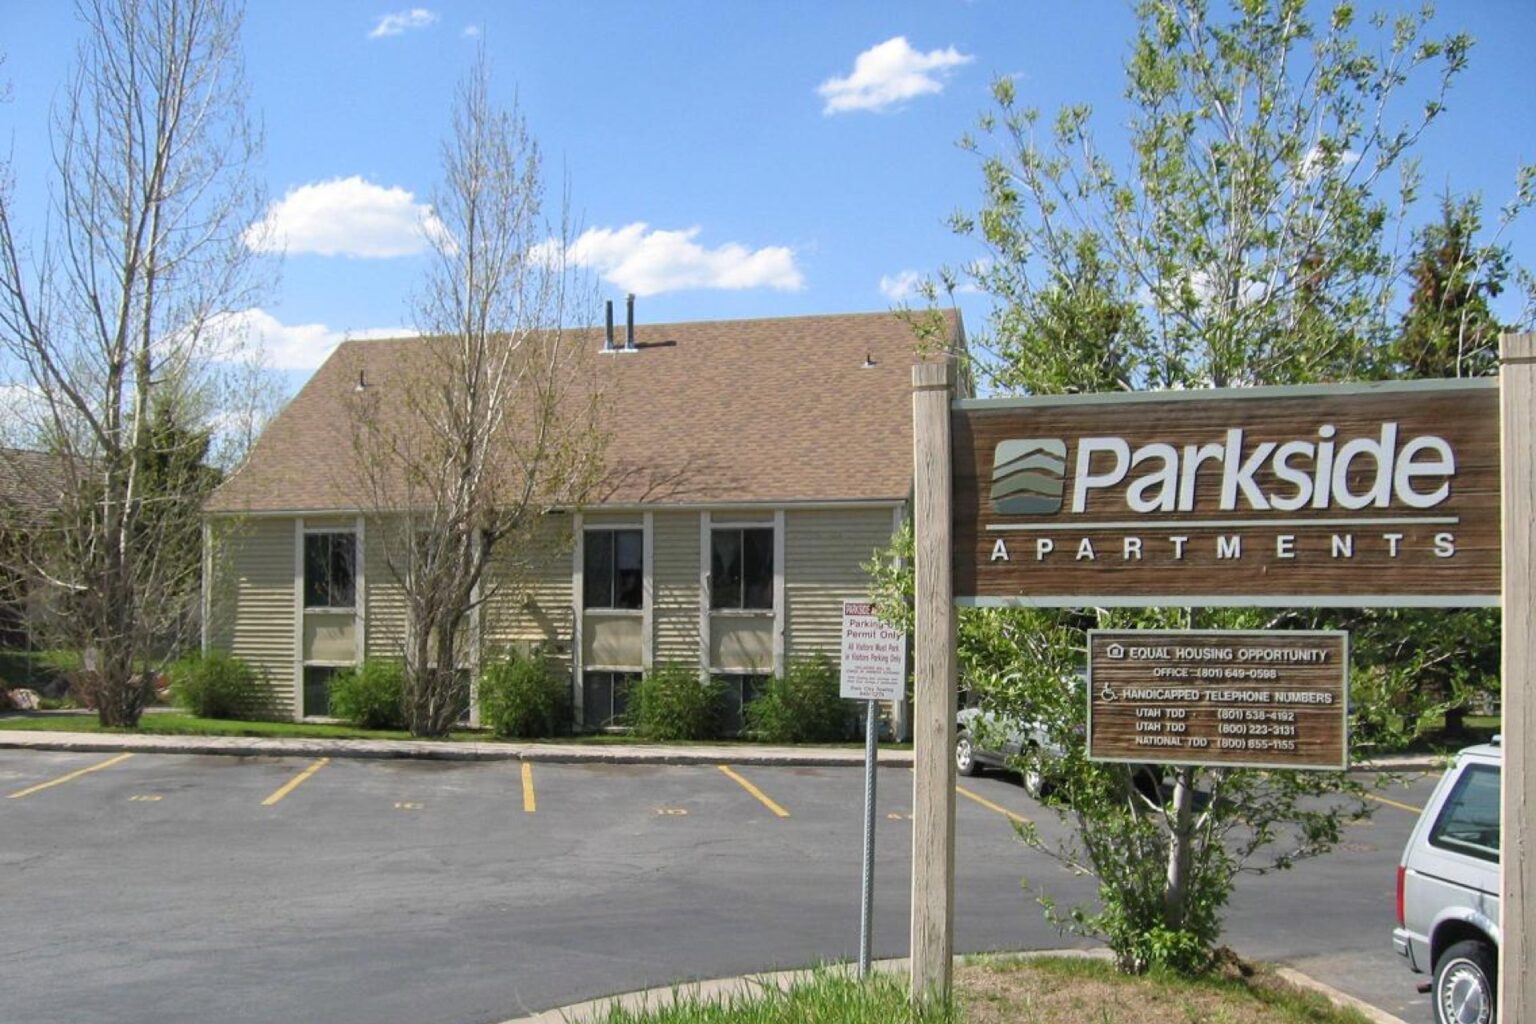 Parkside Apartments - community housing project by Mountainlands Community Housing Trust